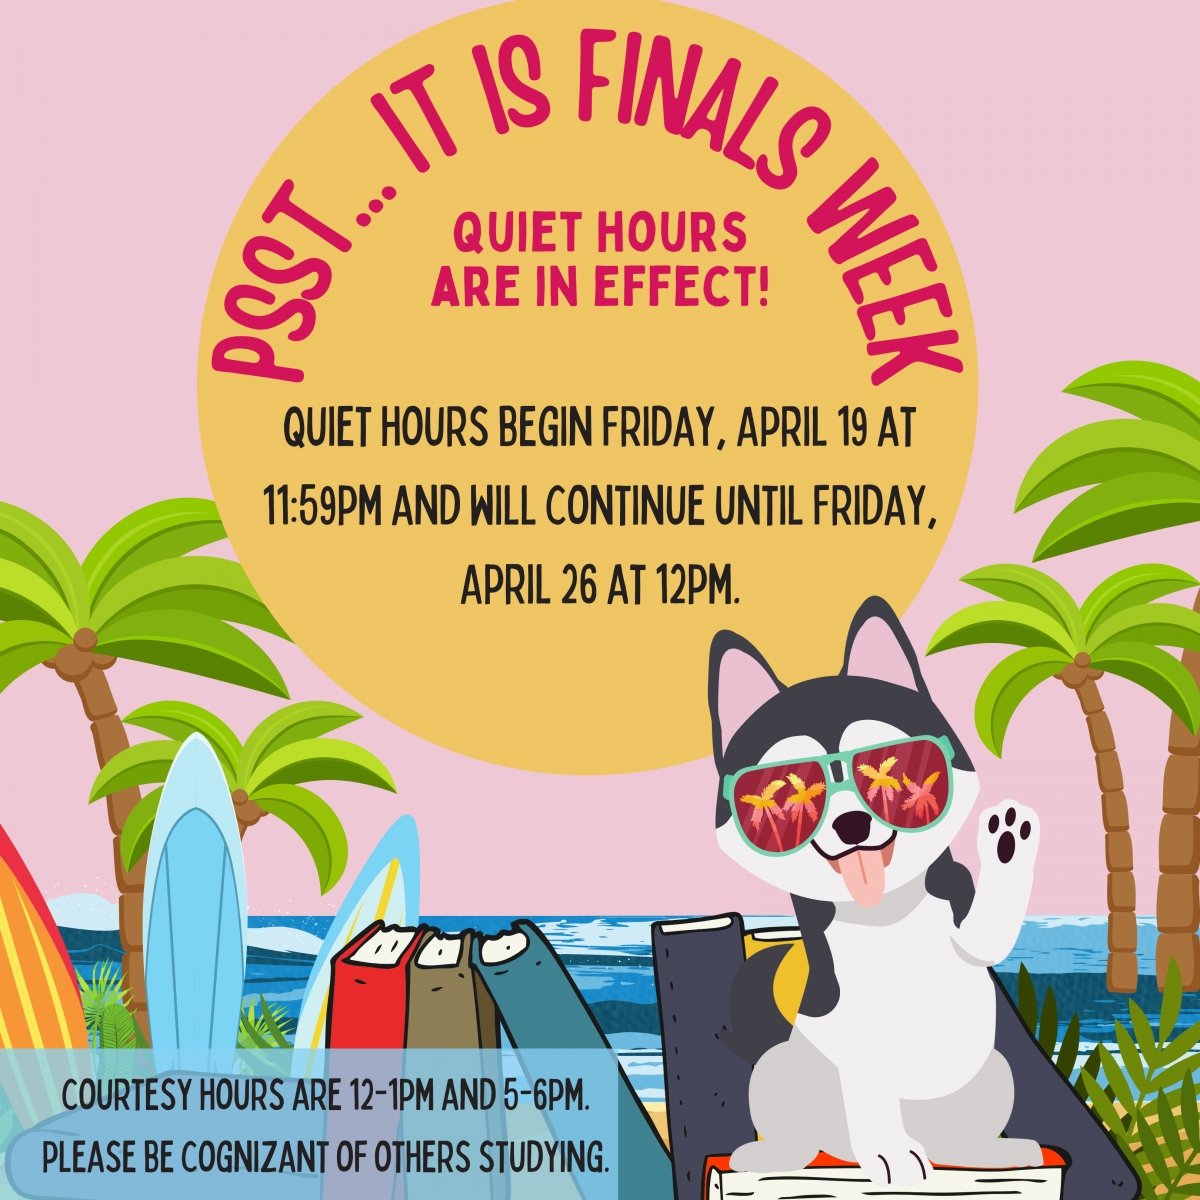 quiet hours begin Friday, April 19 at 11:59pm and will continue until Friday, April 26 at 12pm.  courtesy hours are 12-1pm and 5-6pm. please be cognizant of others studying.